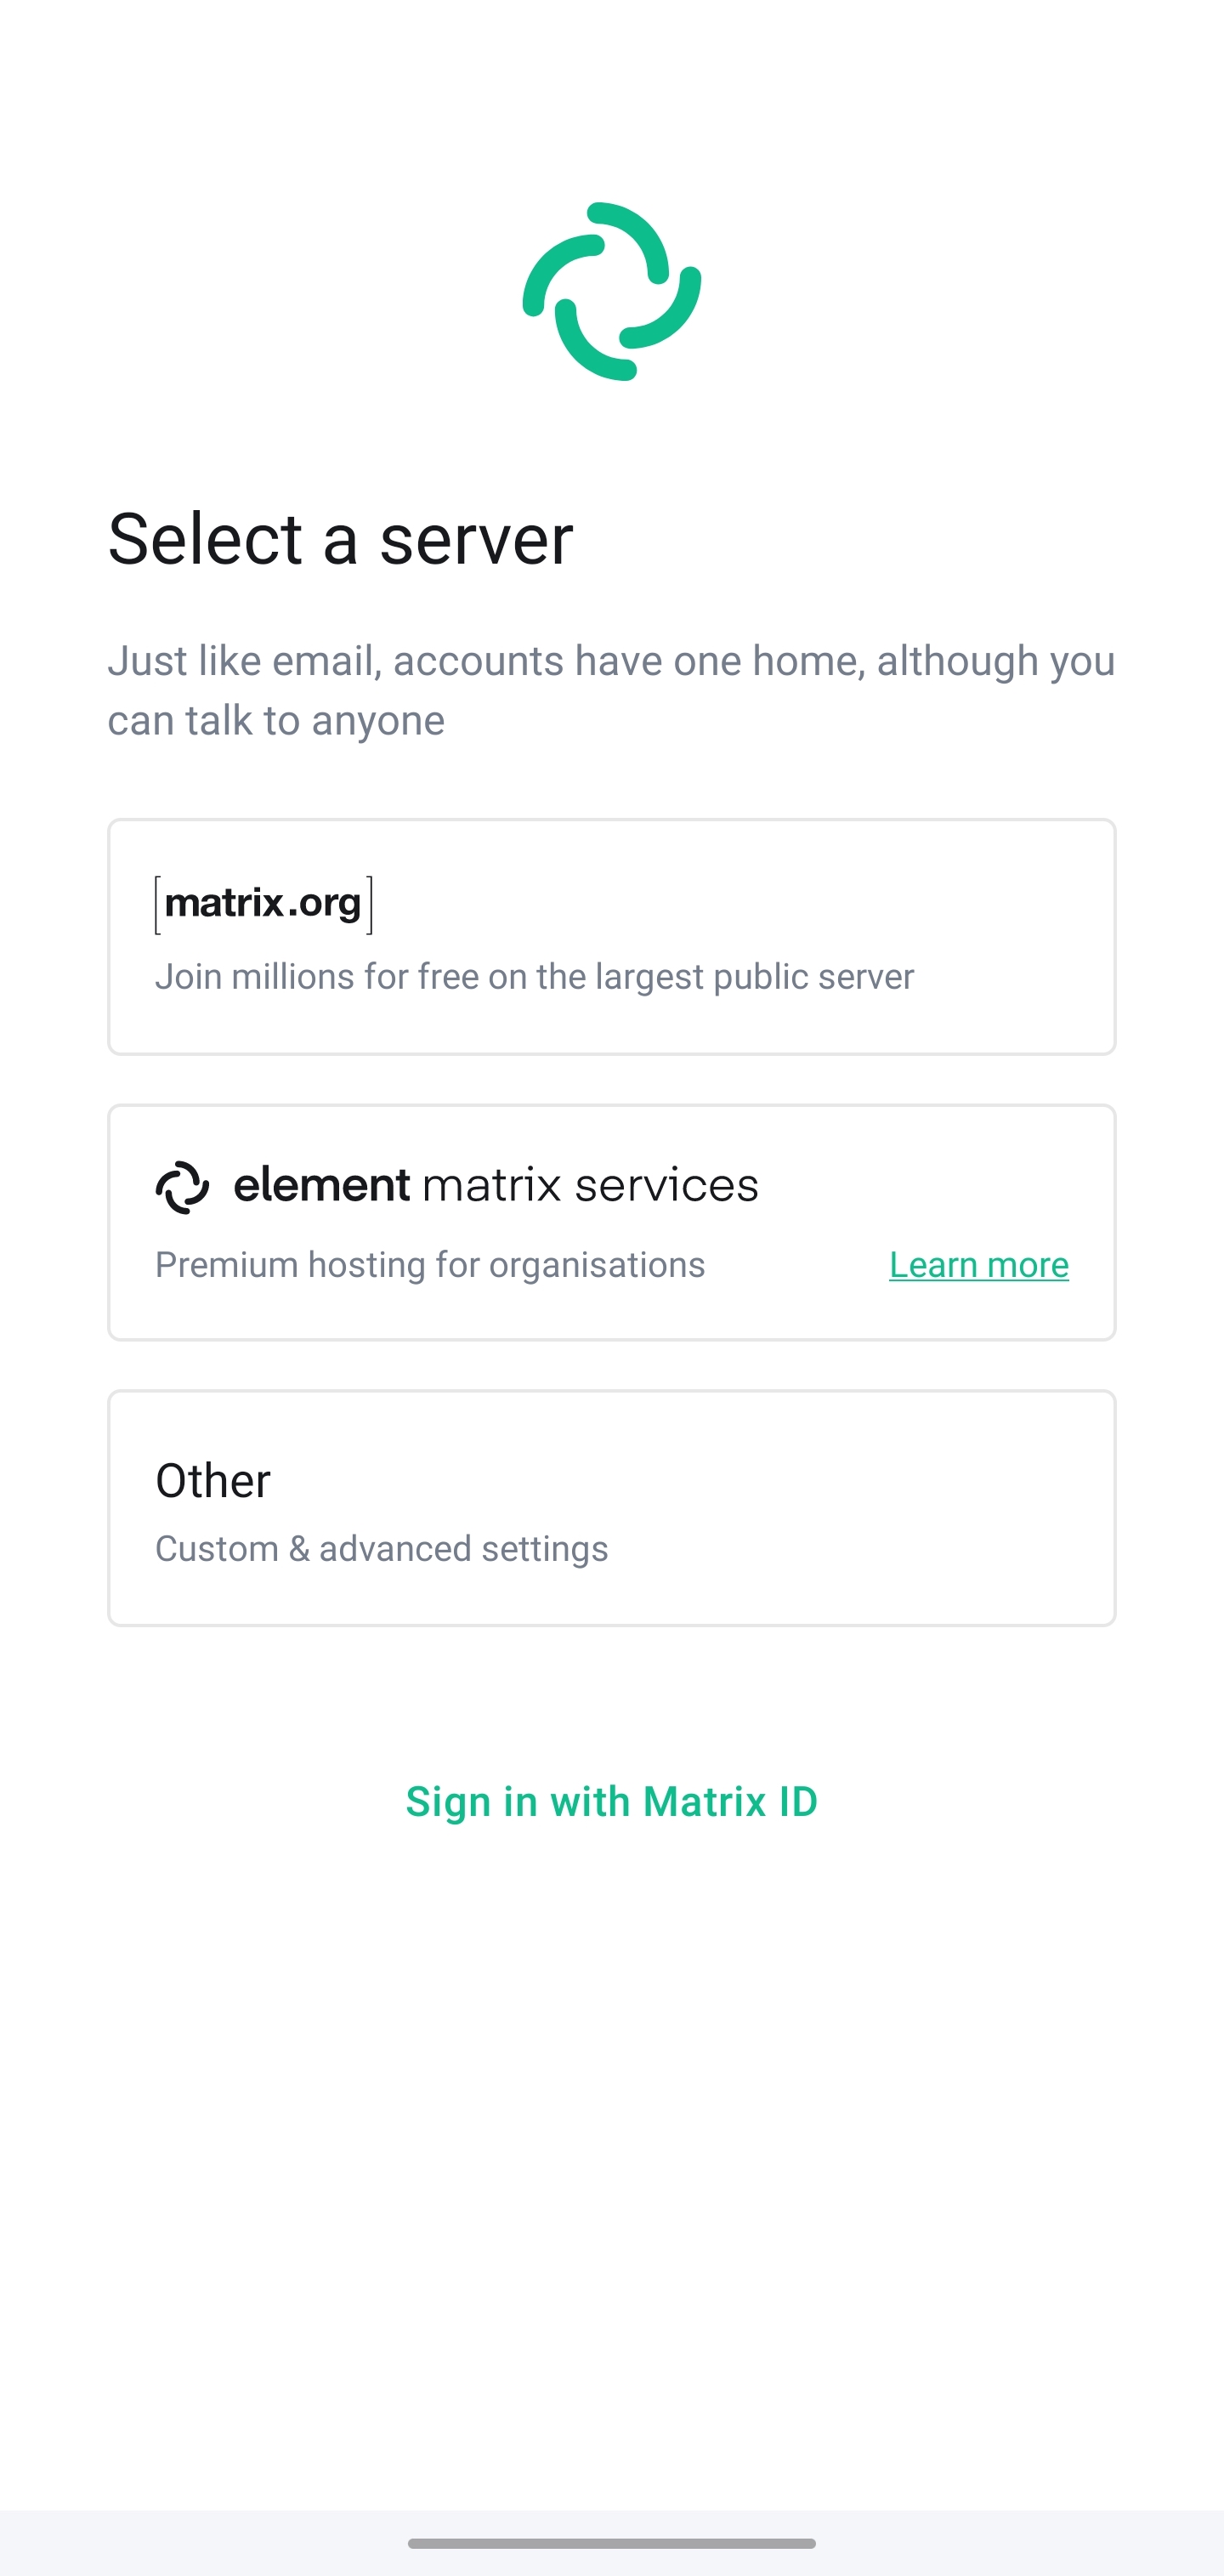 Selection of a server: You can see the options “matrix.org”, “element matrix services” and “Other”.